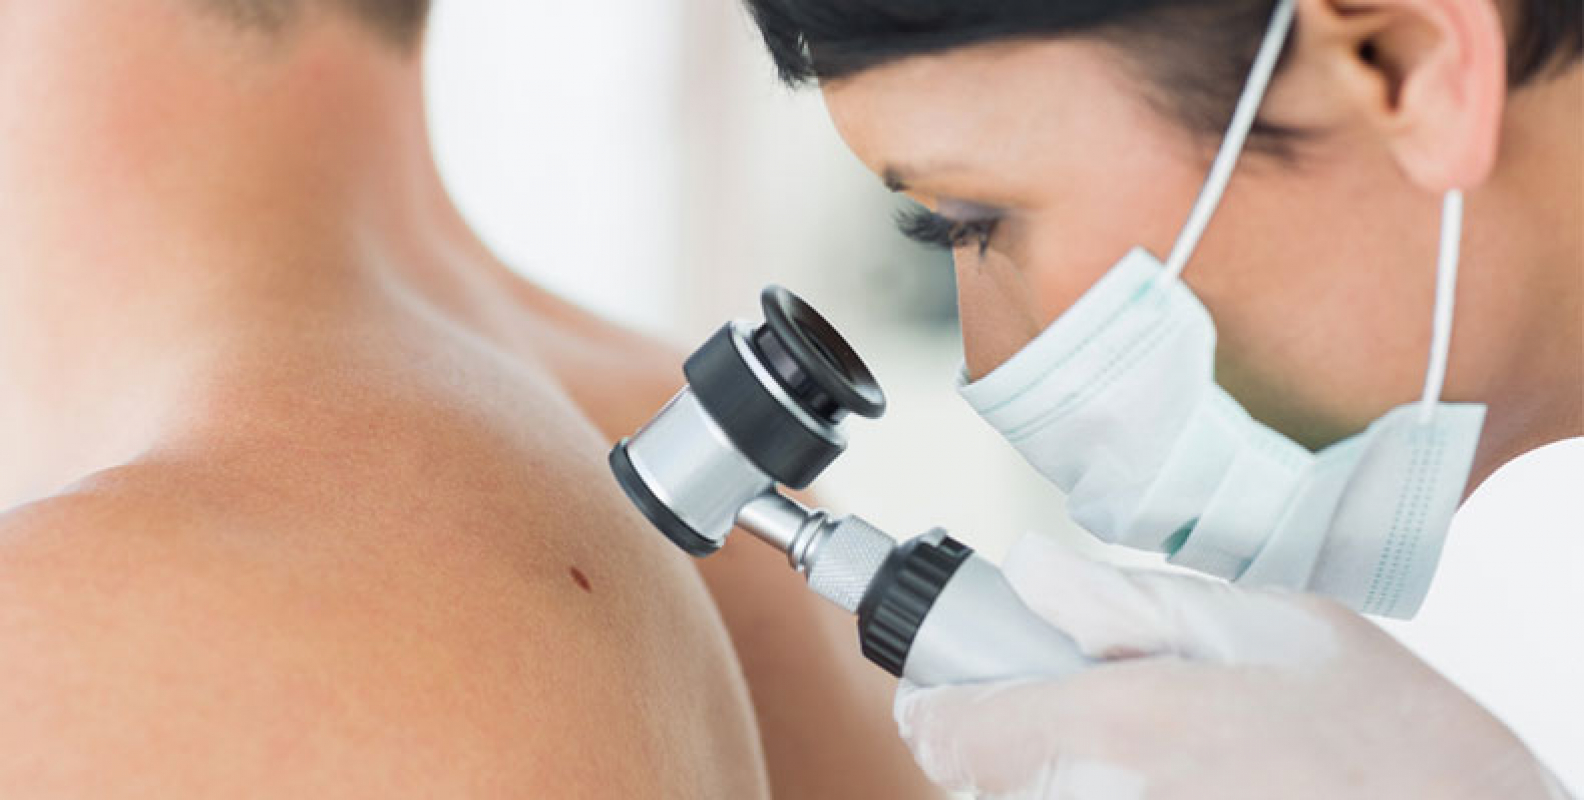 What To Expect During Skin Cancer Screening Dermatologists